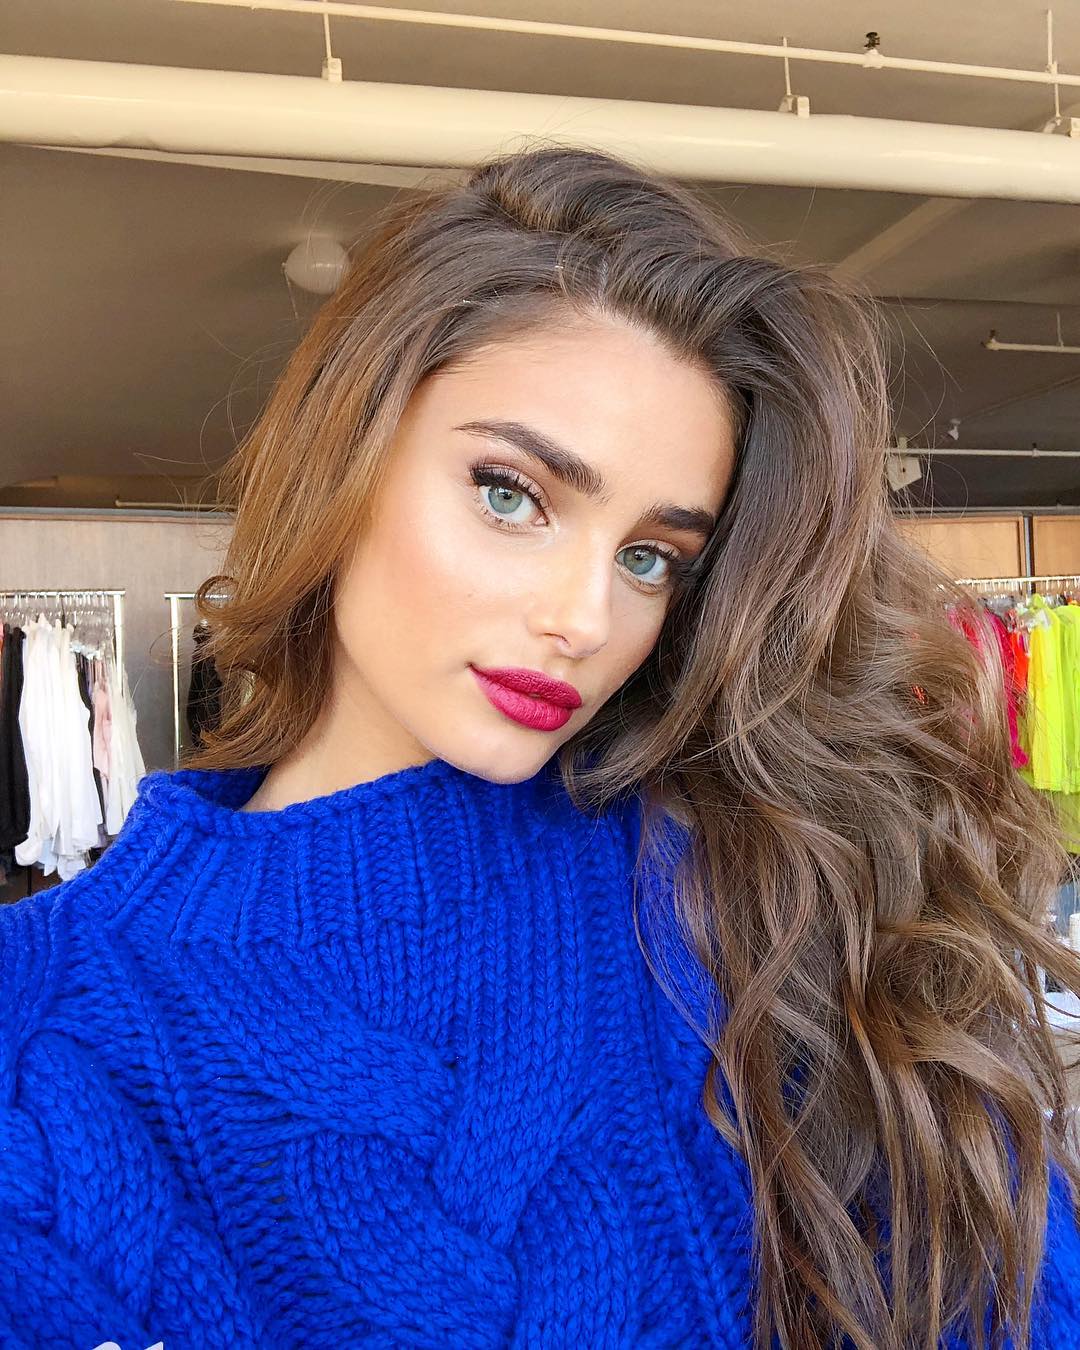 Taylor hill 6 hottest pics, taylor hill 6 instagram